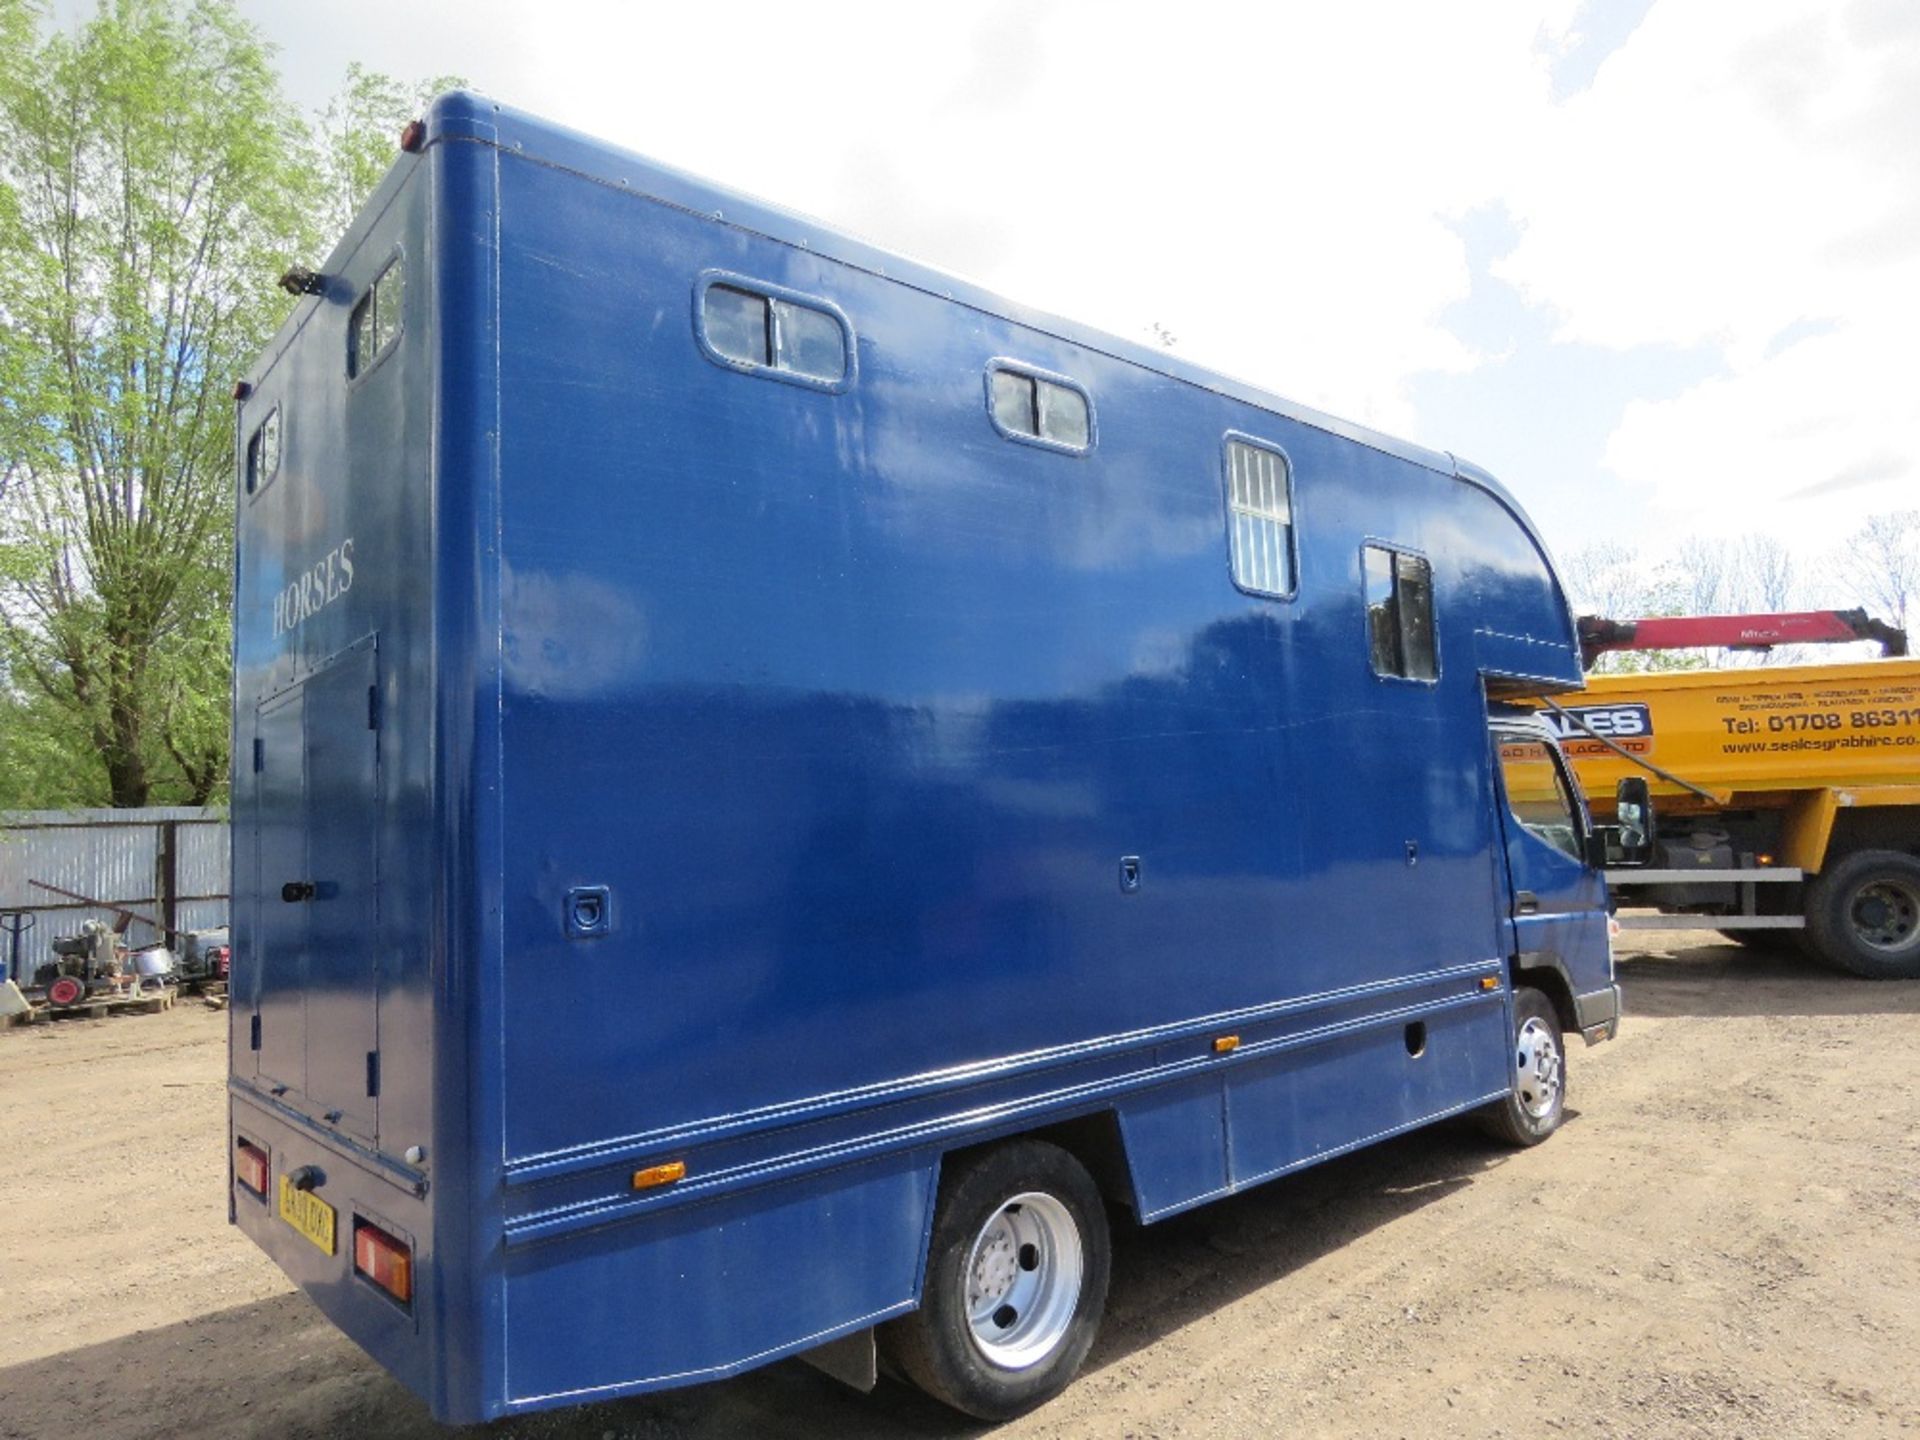 MITSUBISHI CANTER HORSE BOX LORRY REG:GK09 OXG. V5 AND PLATING CERTIFICATE IN OFFICE. MOT EXPIRED. - Image 9 of 24